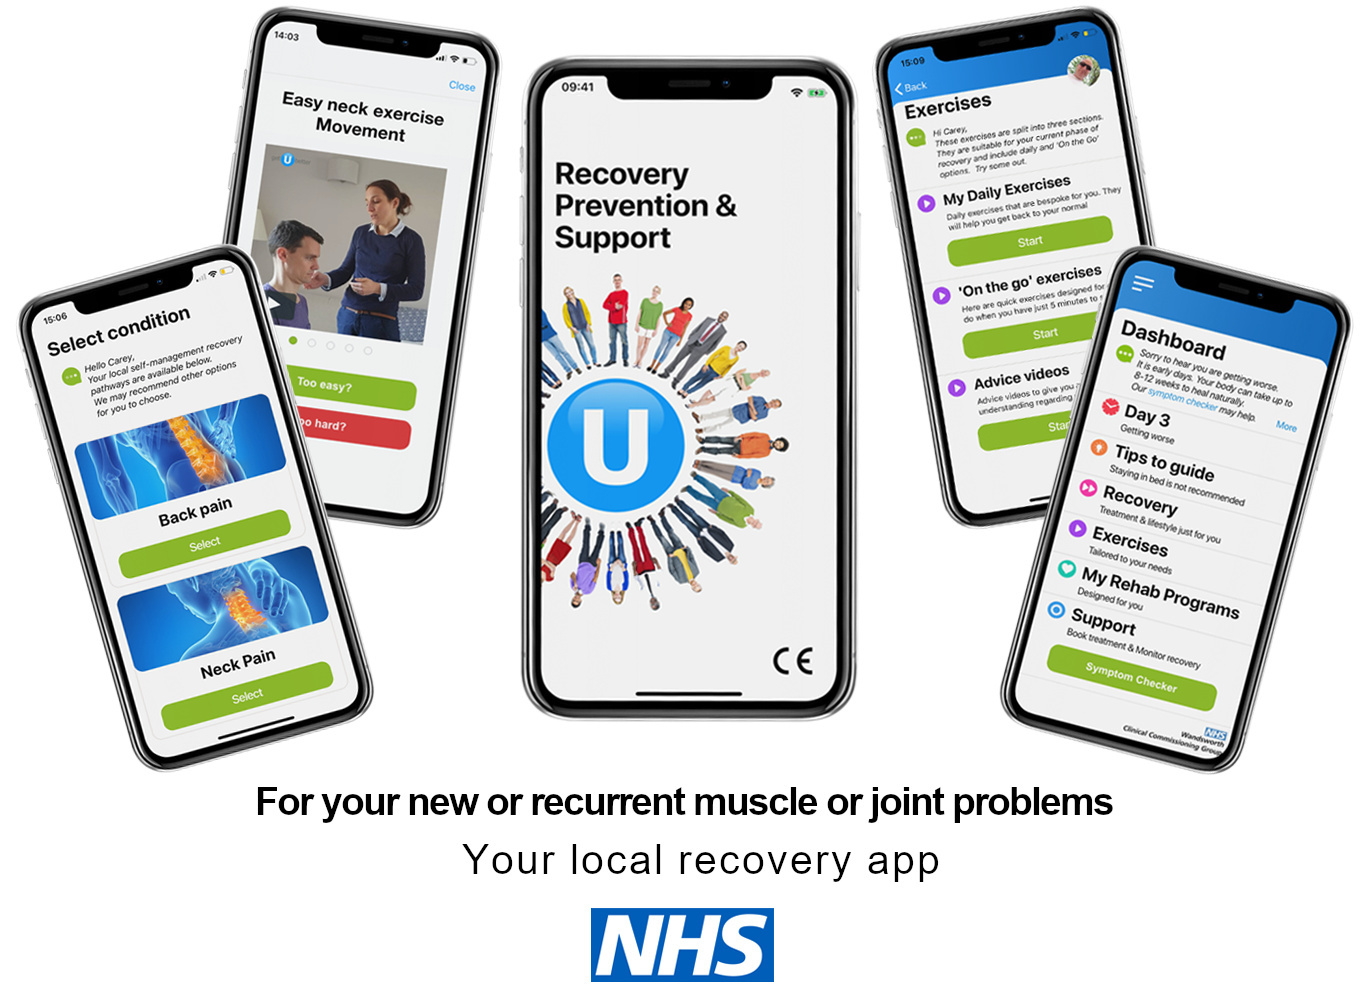 For your new or recurrent muscle or joint problems. Your local recovery app